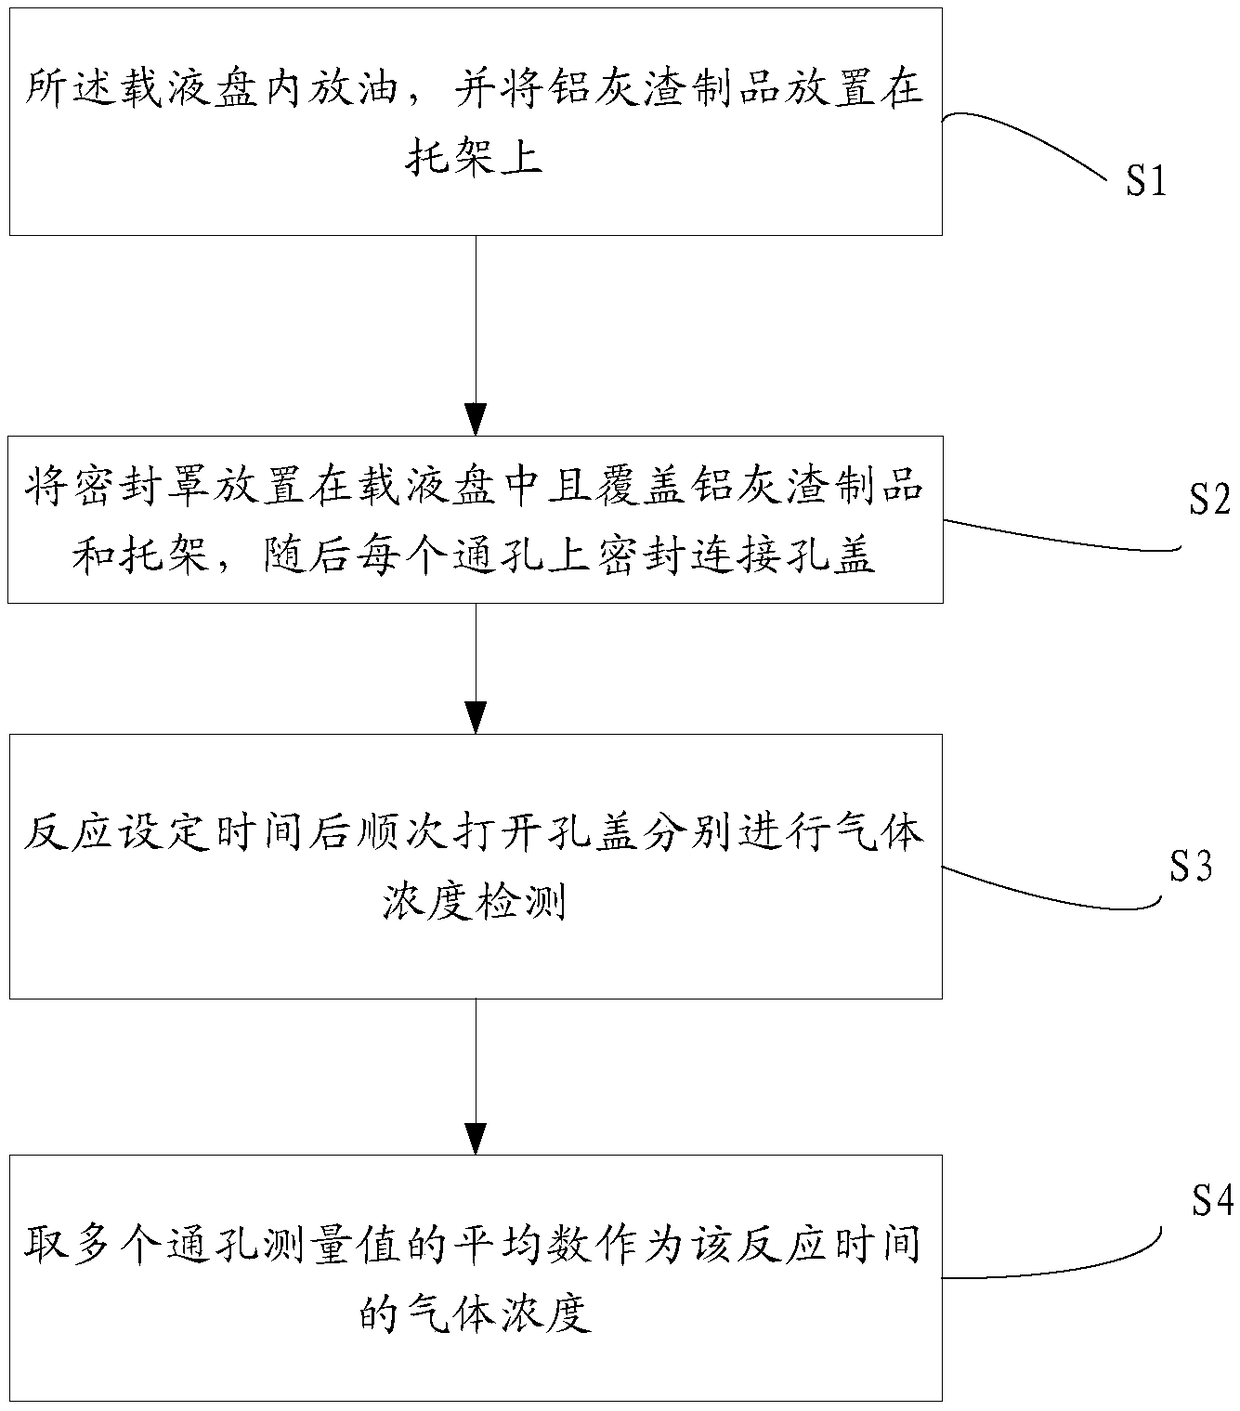 Gas concentration detection device and aluminum ash post-hydrolysis ammonia concentration detection method